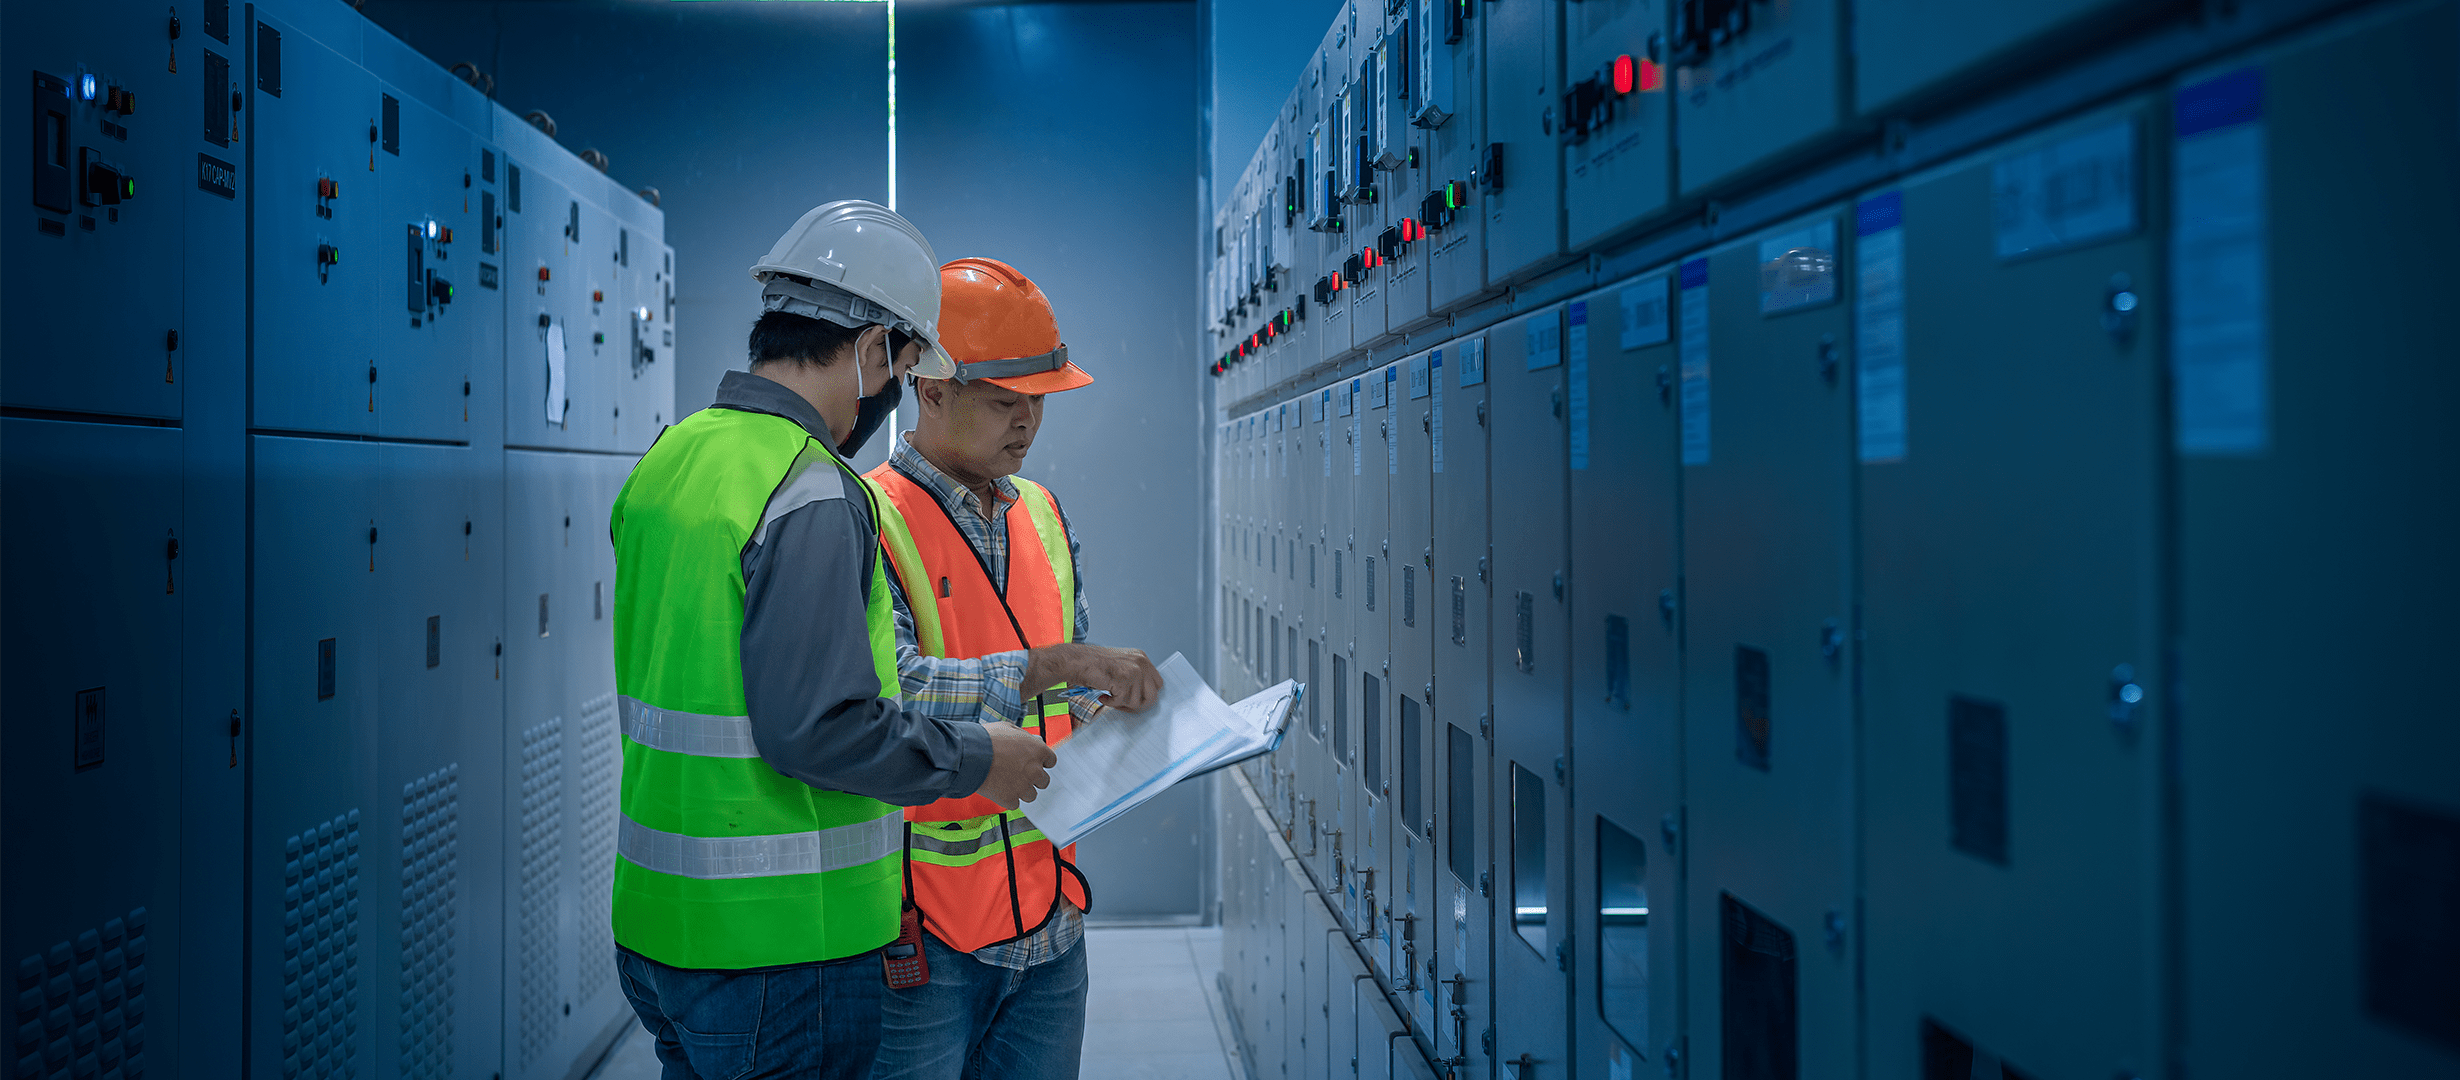 Photograph of two electrical workers in PPE reviewing paperwork near an electrical system